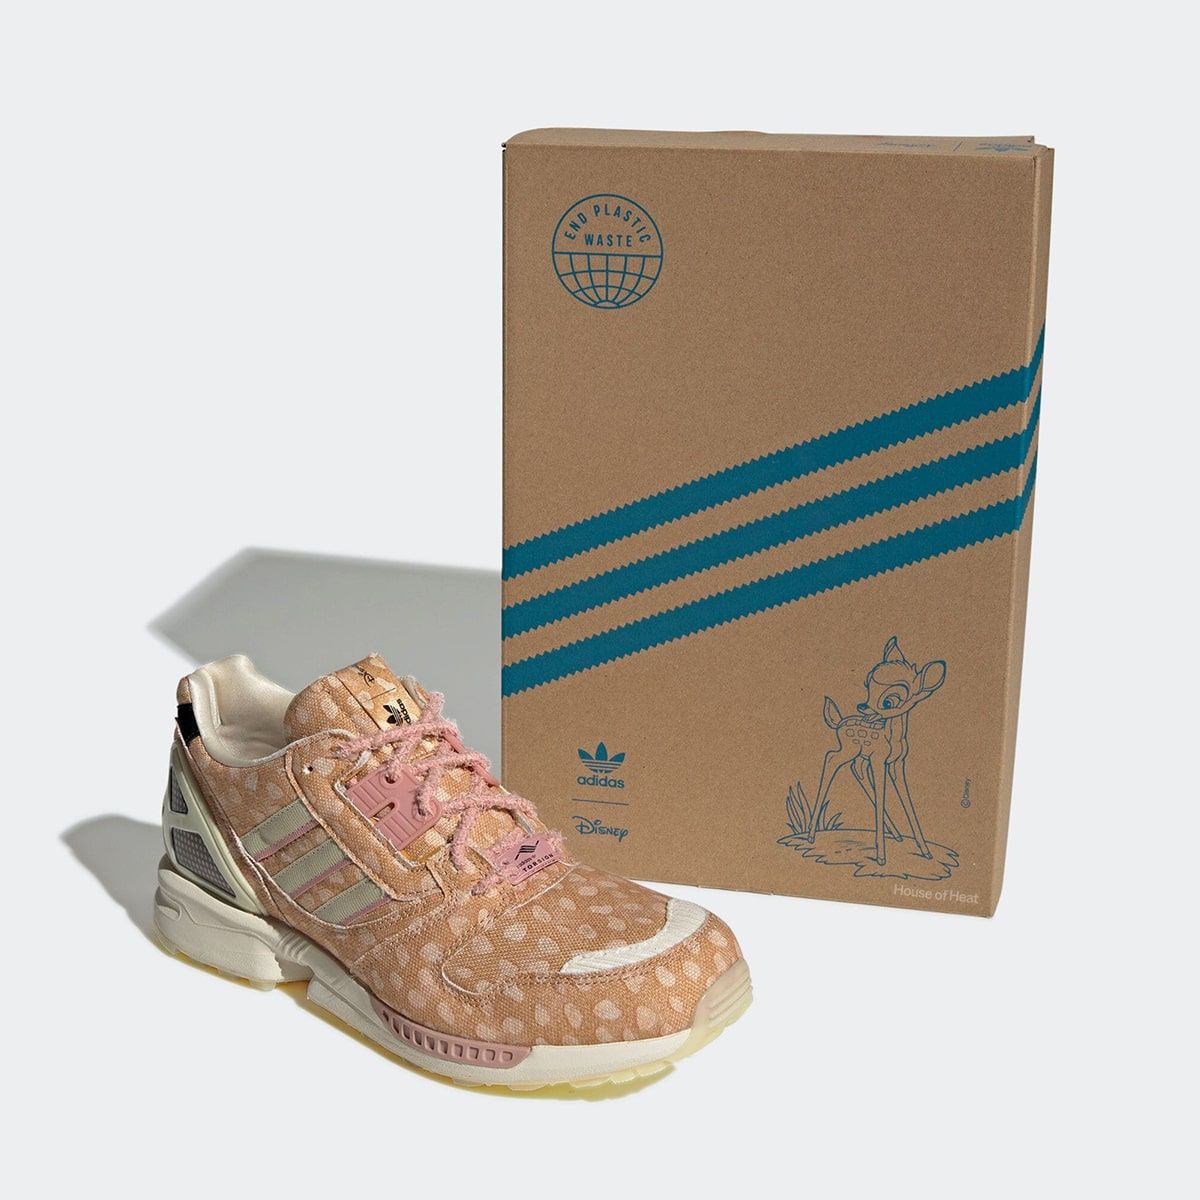 Disney x adidas ZX 8000 “Bambi” is Dropping Soon | House of Heat°